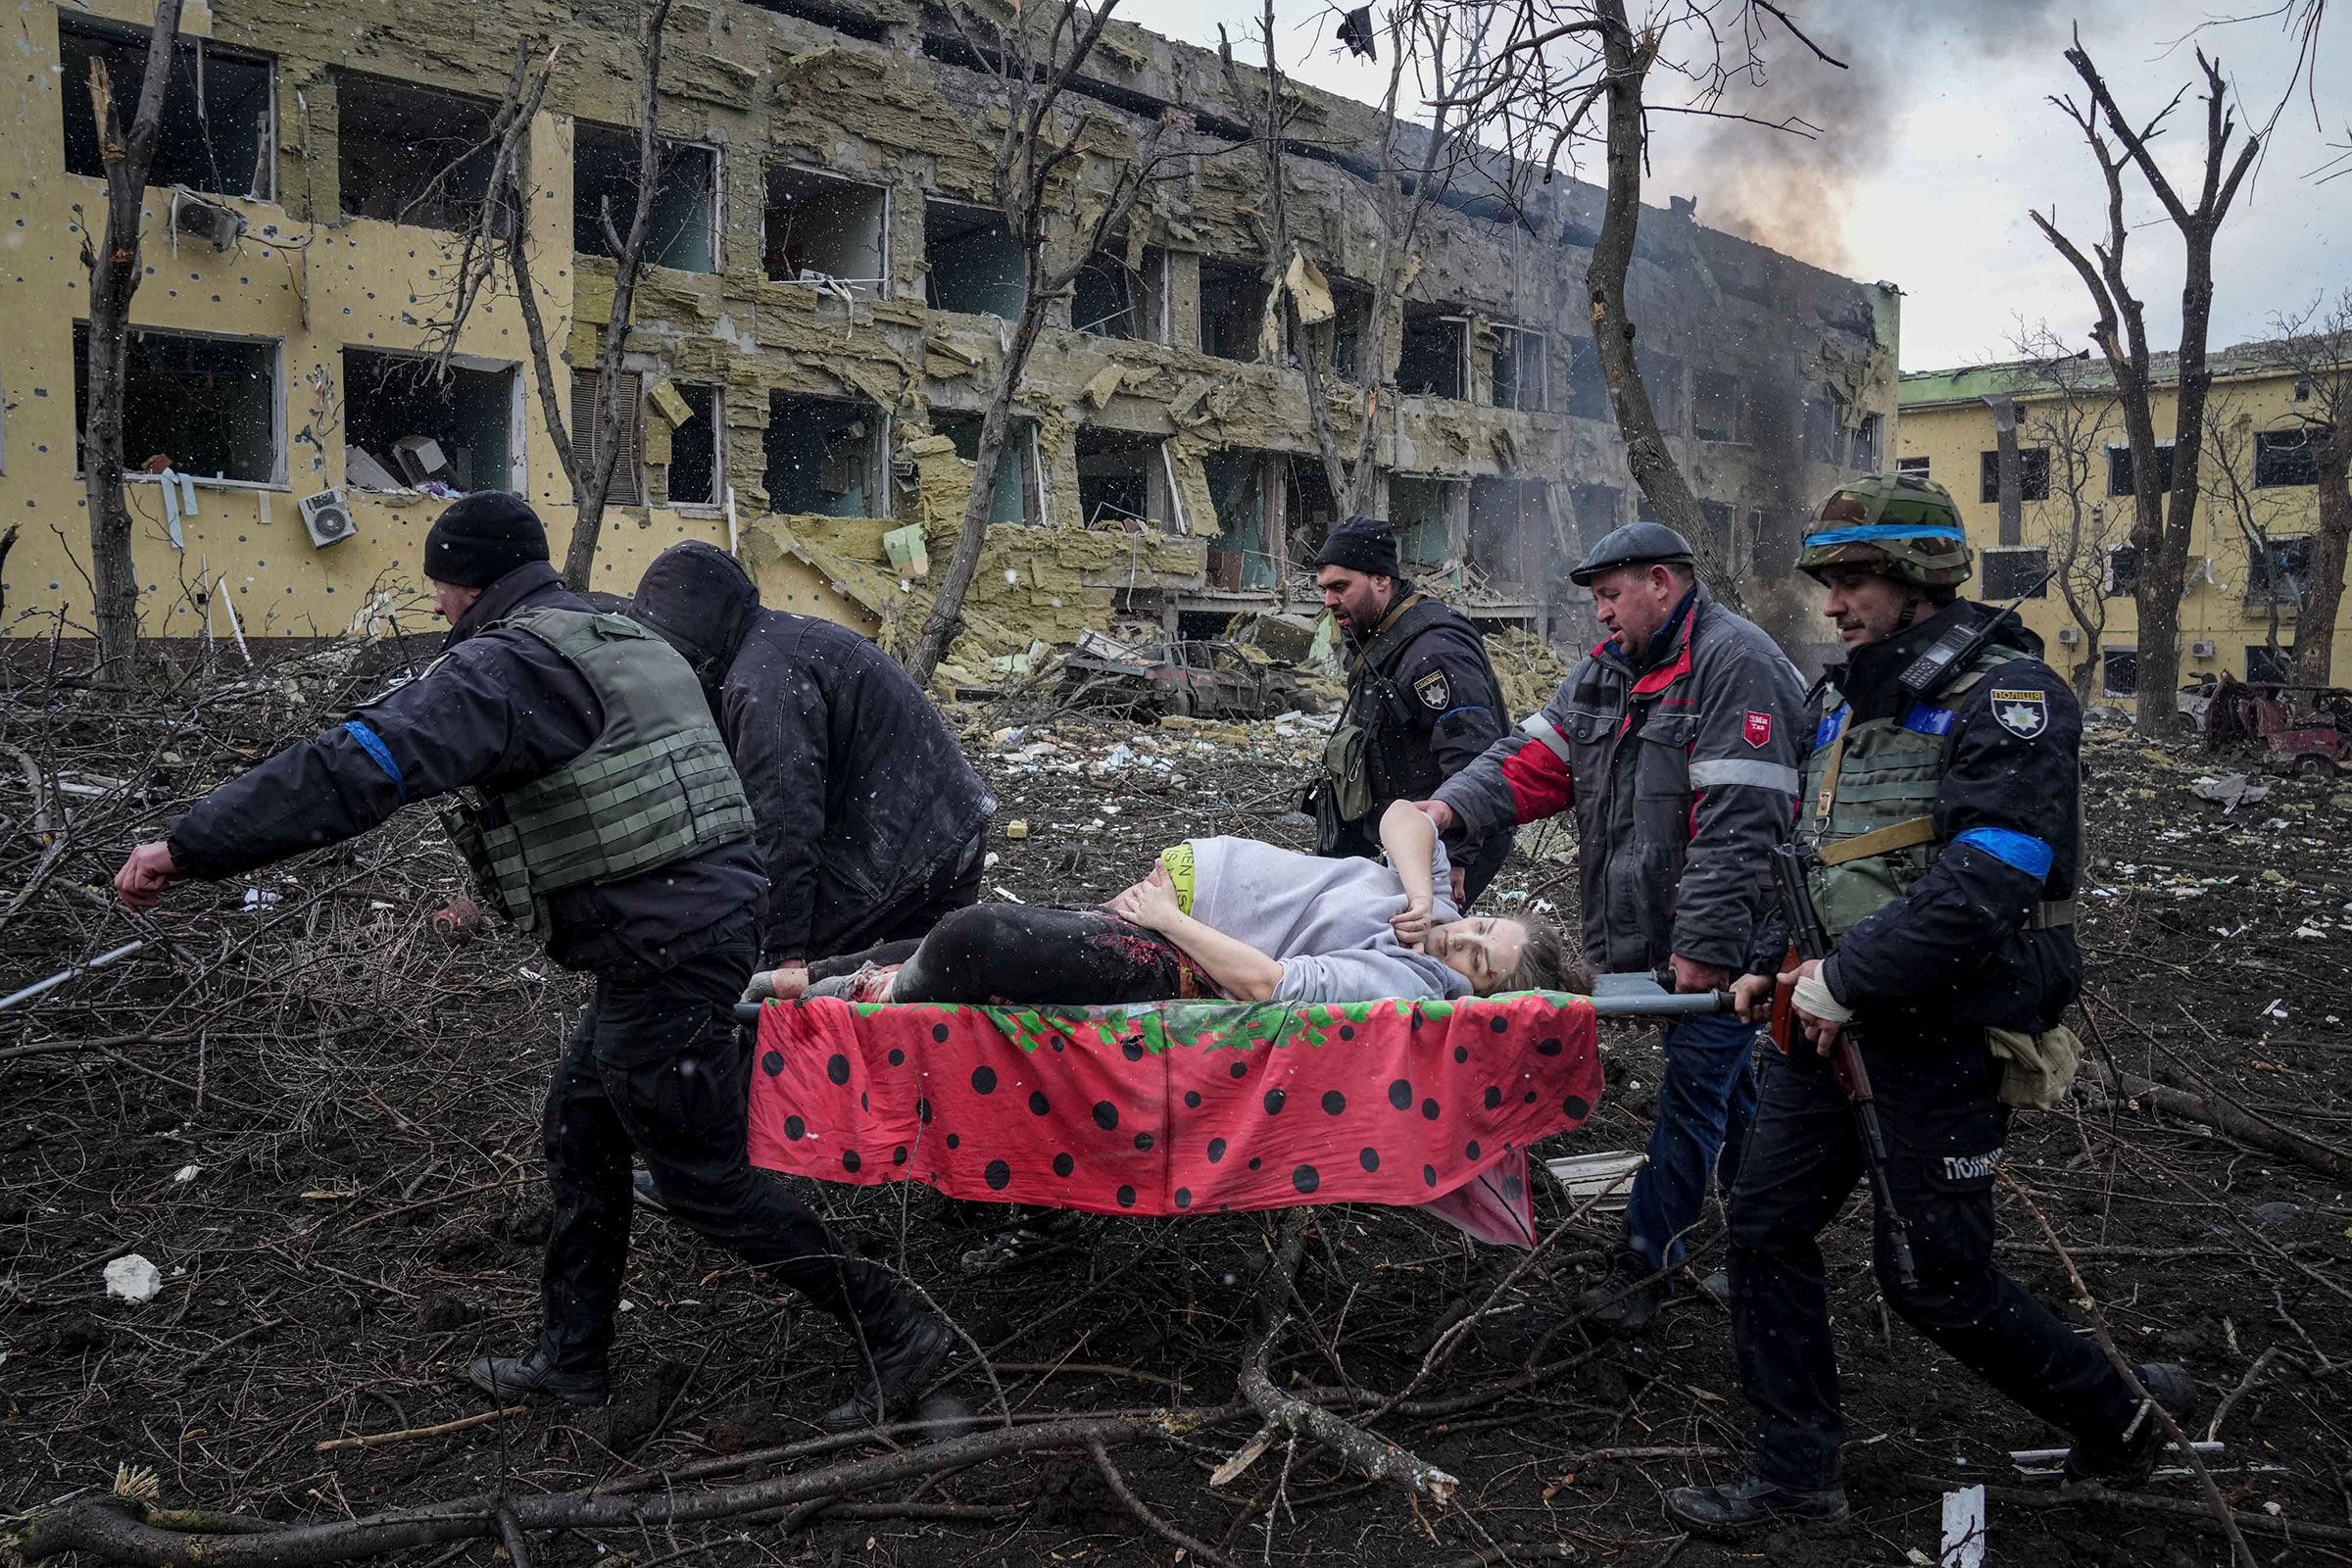 Ukrainian emergency employees and volunteers carry an injured pregnant woman from a damaged maternity hospital in Mariupol on March 9.